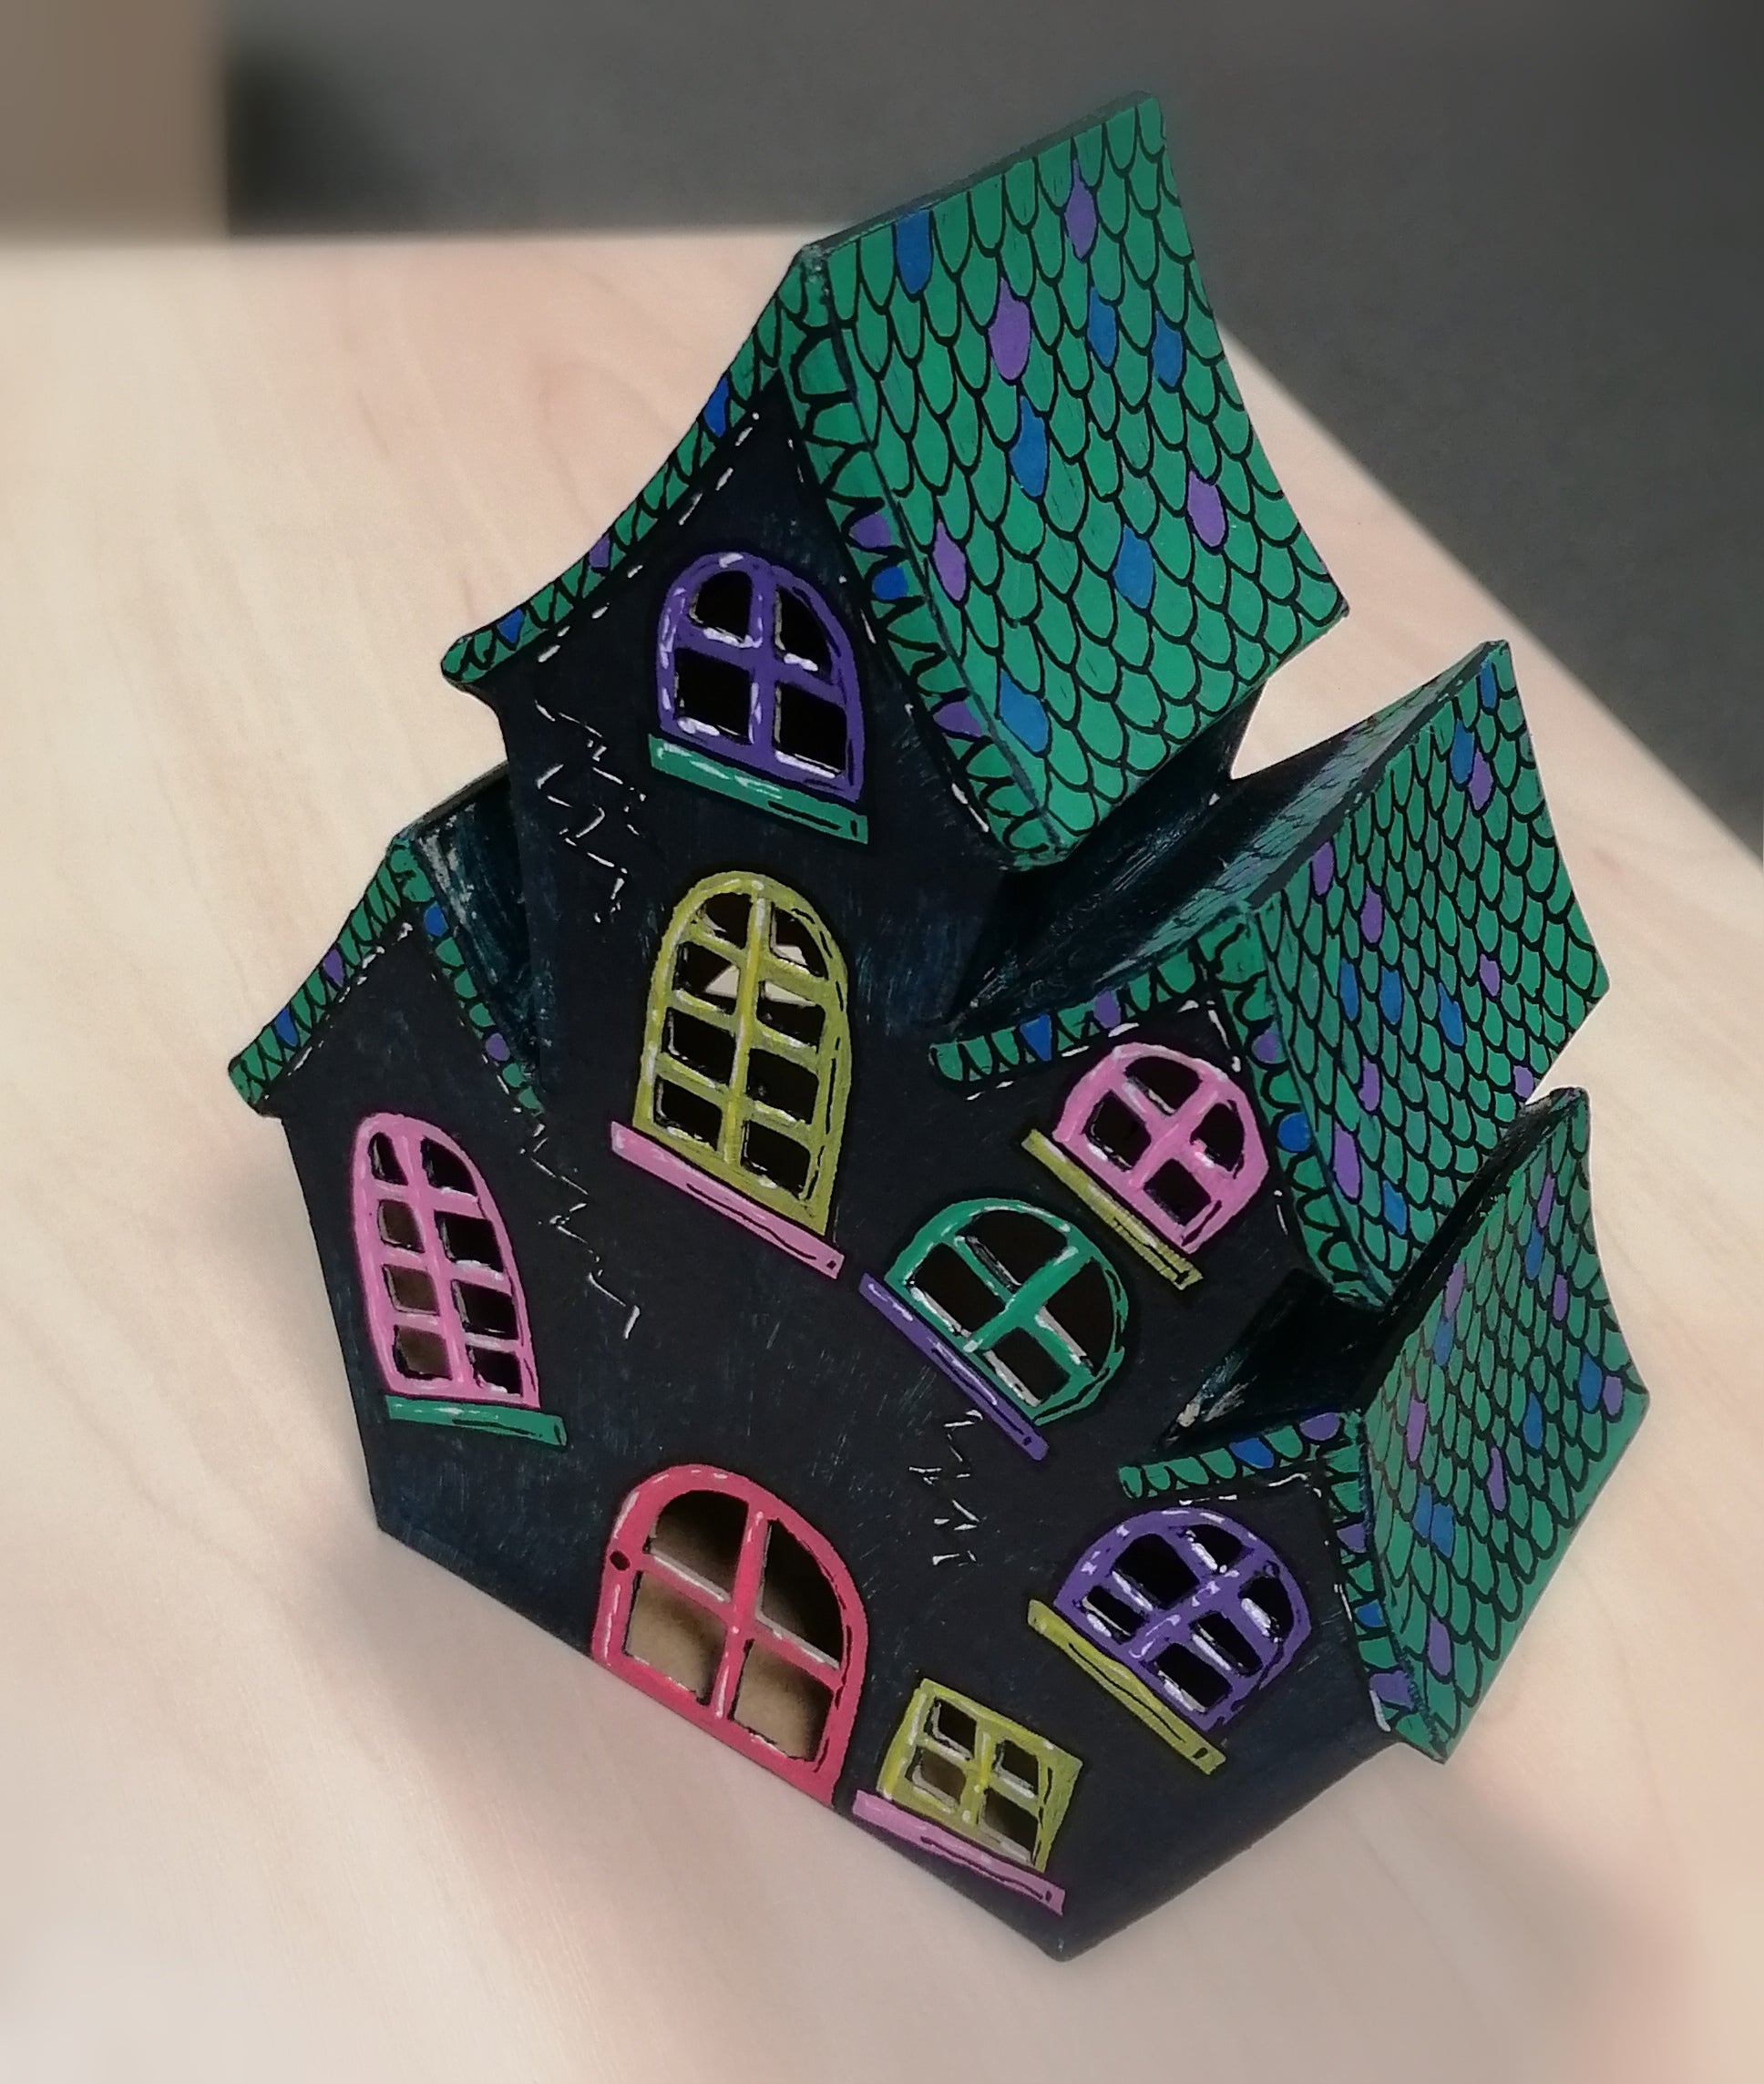 A Halloween house model decorated using POSCA